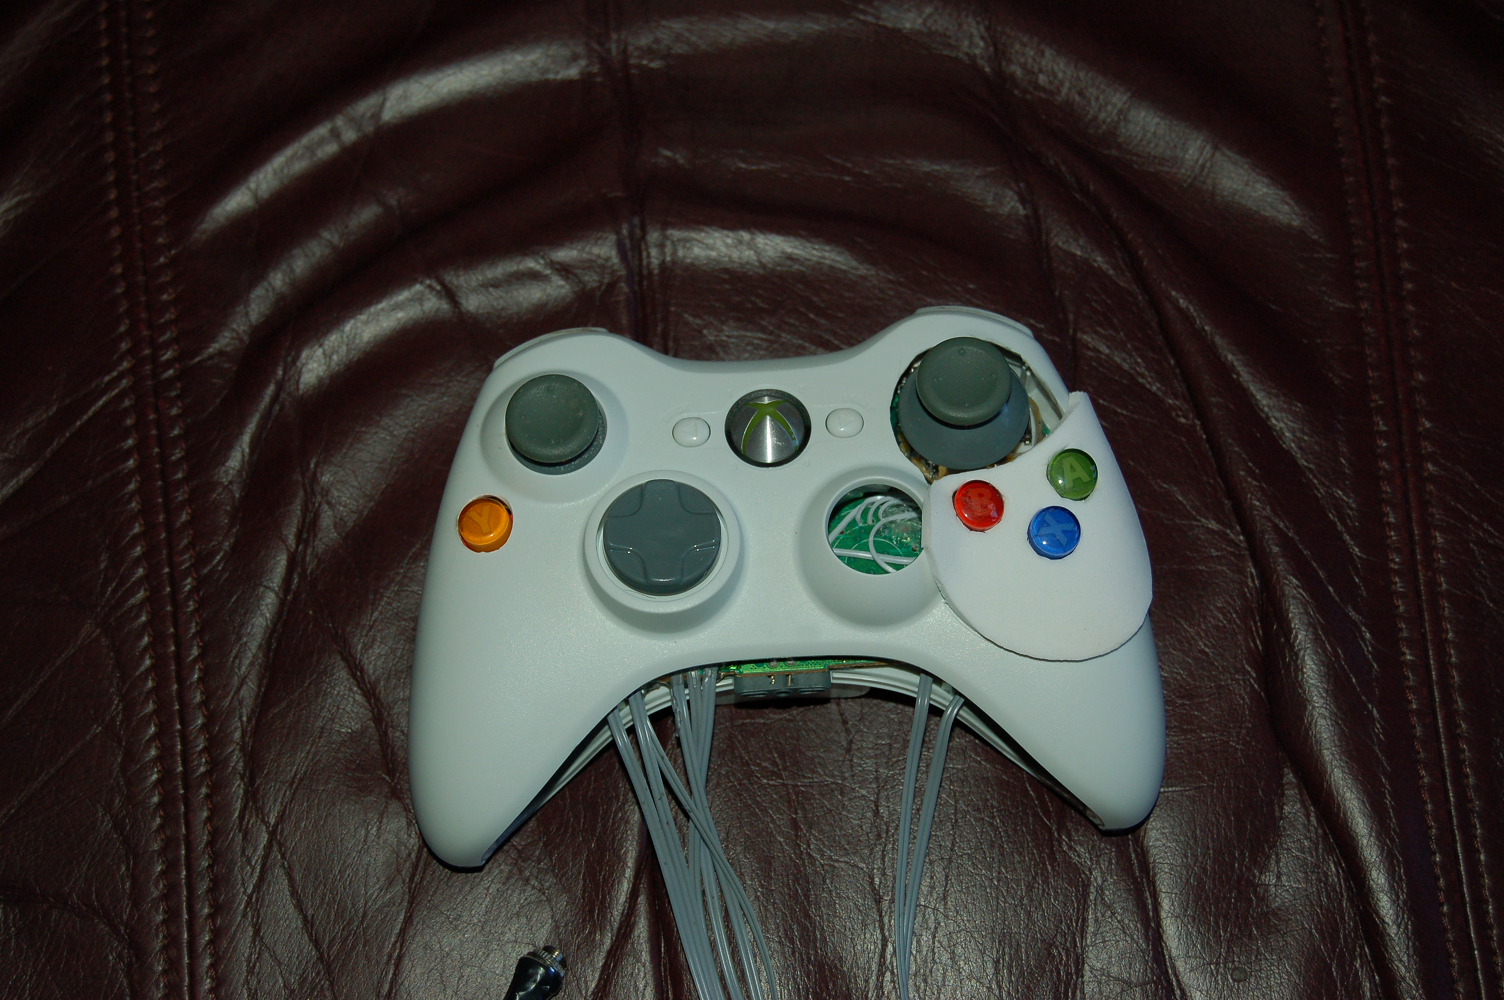 Photo of the final modified Xbox 360 controller